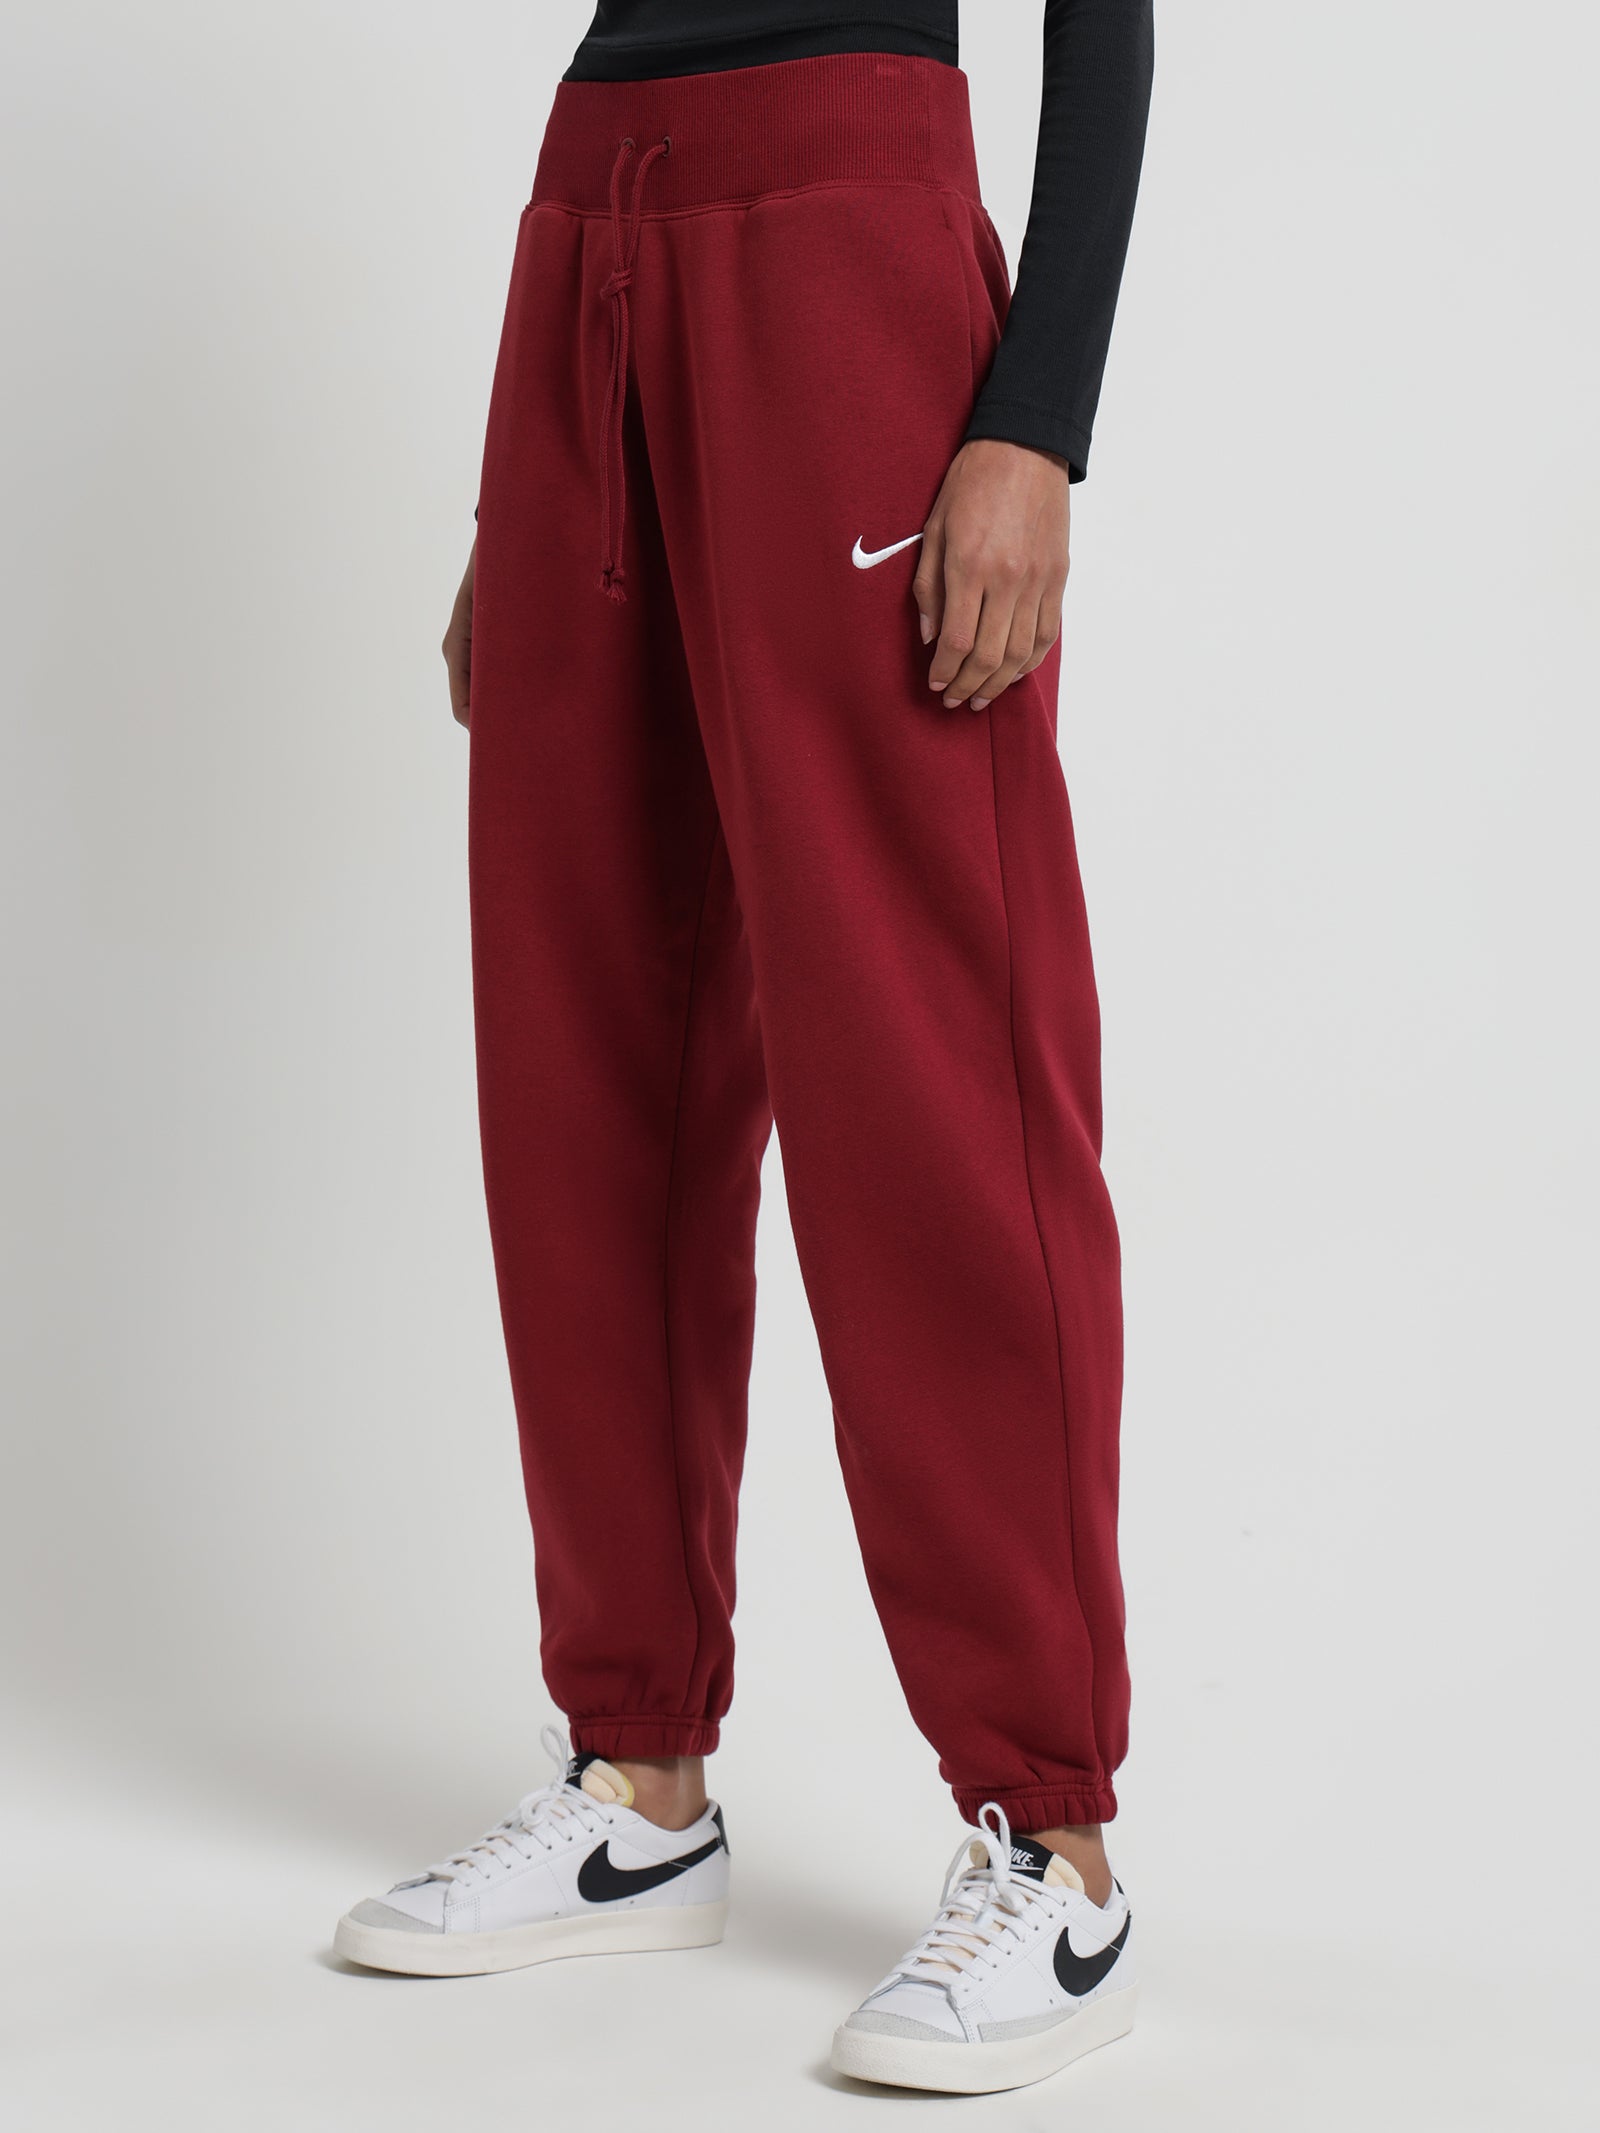 Nike Red Tropical Hyper Femme Print Tracksuit Bottoms